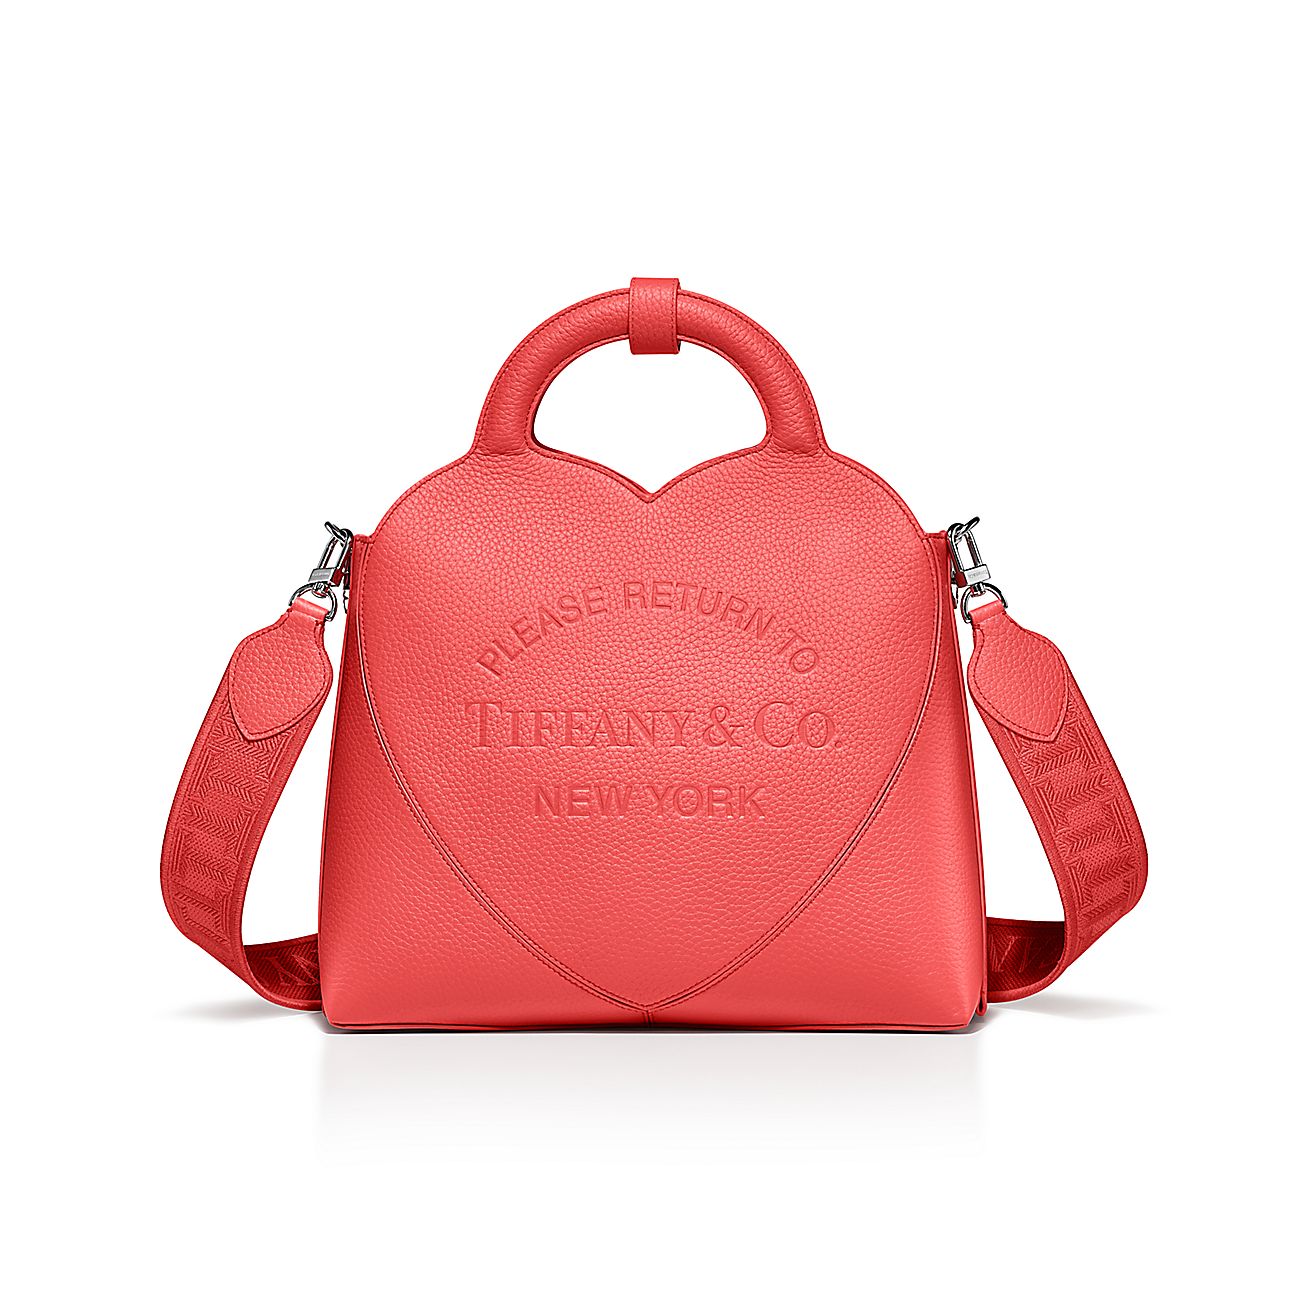 Ritual Schedule pilot Return to Tiffany® Small Tote Bag in Hibiscus Red Leather | Tiffany & Co.